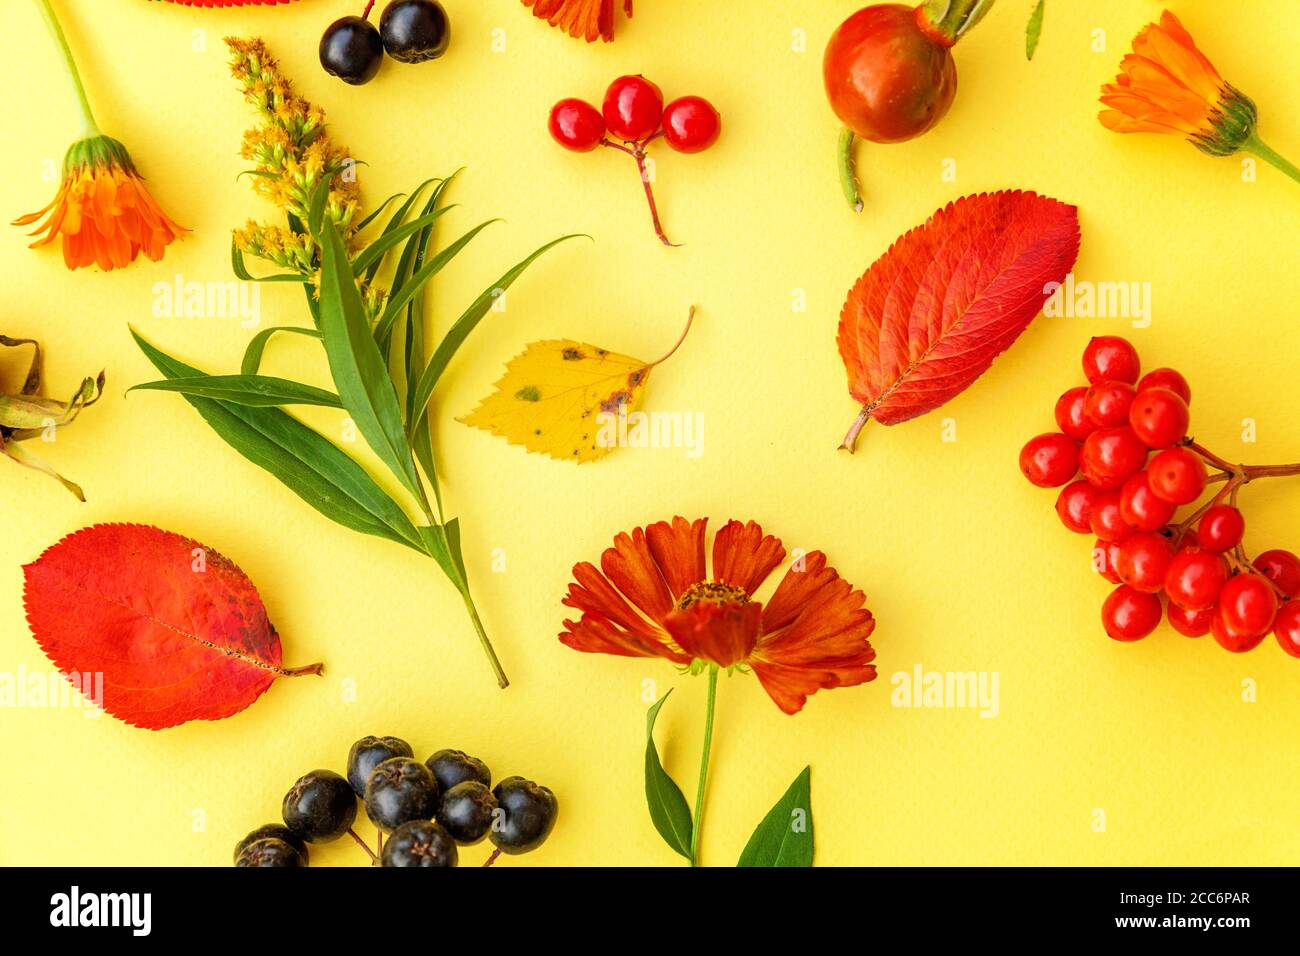 Autumn floral composition. Plants viburnum rowan berries dogrose fresh flowers colorful leaves isolated on yellow background. Fall natural plants ecology wallpaper concept. Flat lay top view Stock Photo